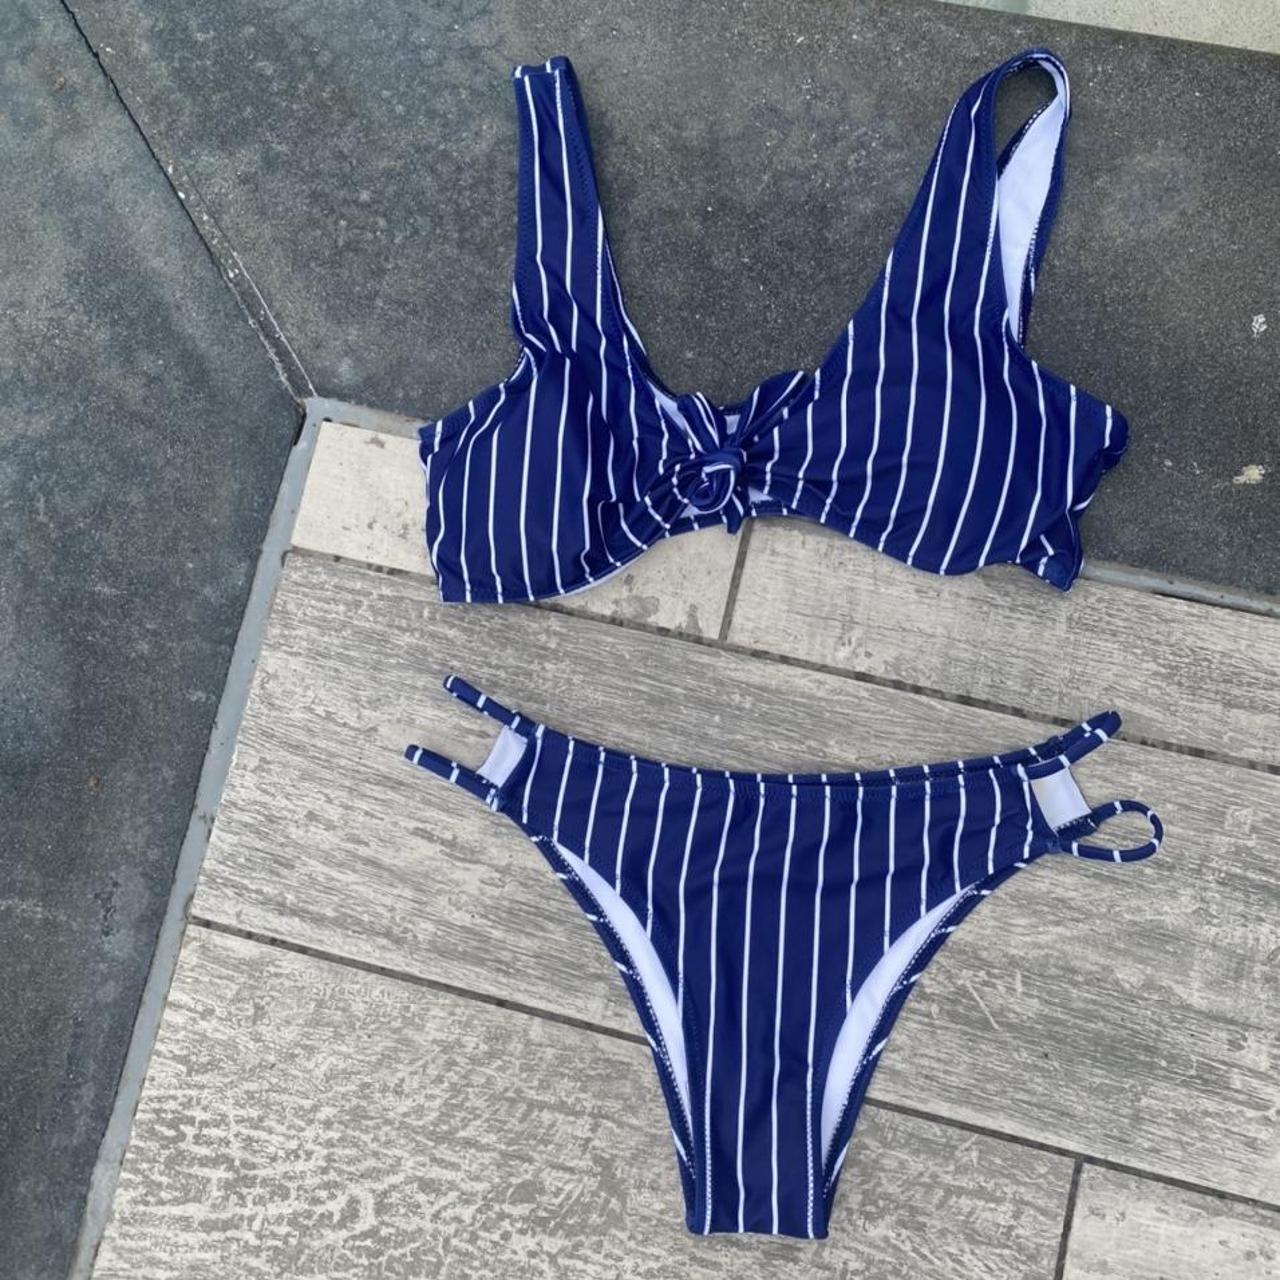 Blooming & Co. Women's Blue and White Bikinis-and-tankini-sets